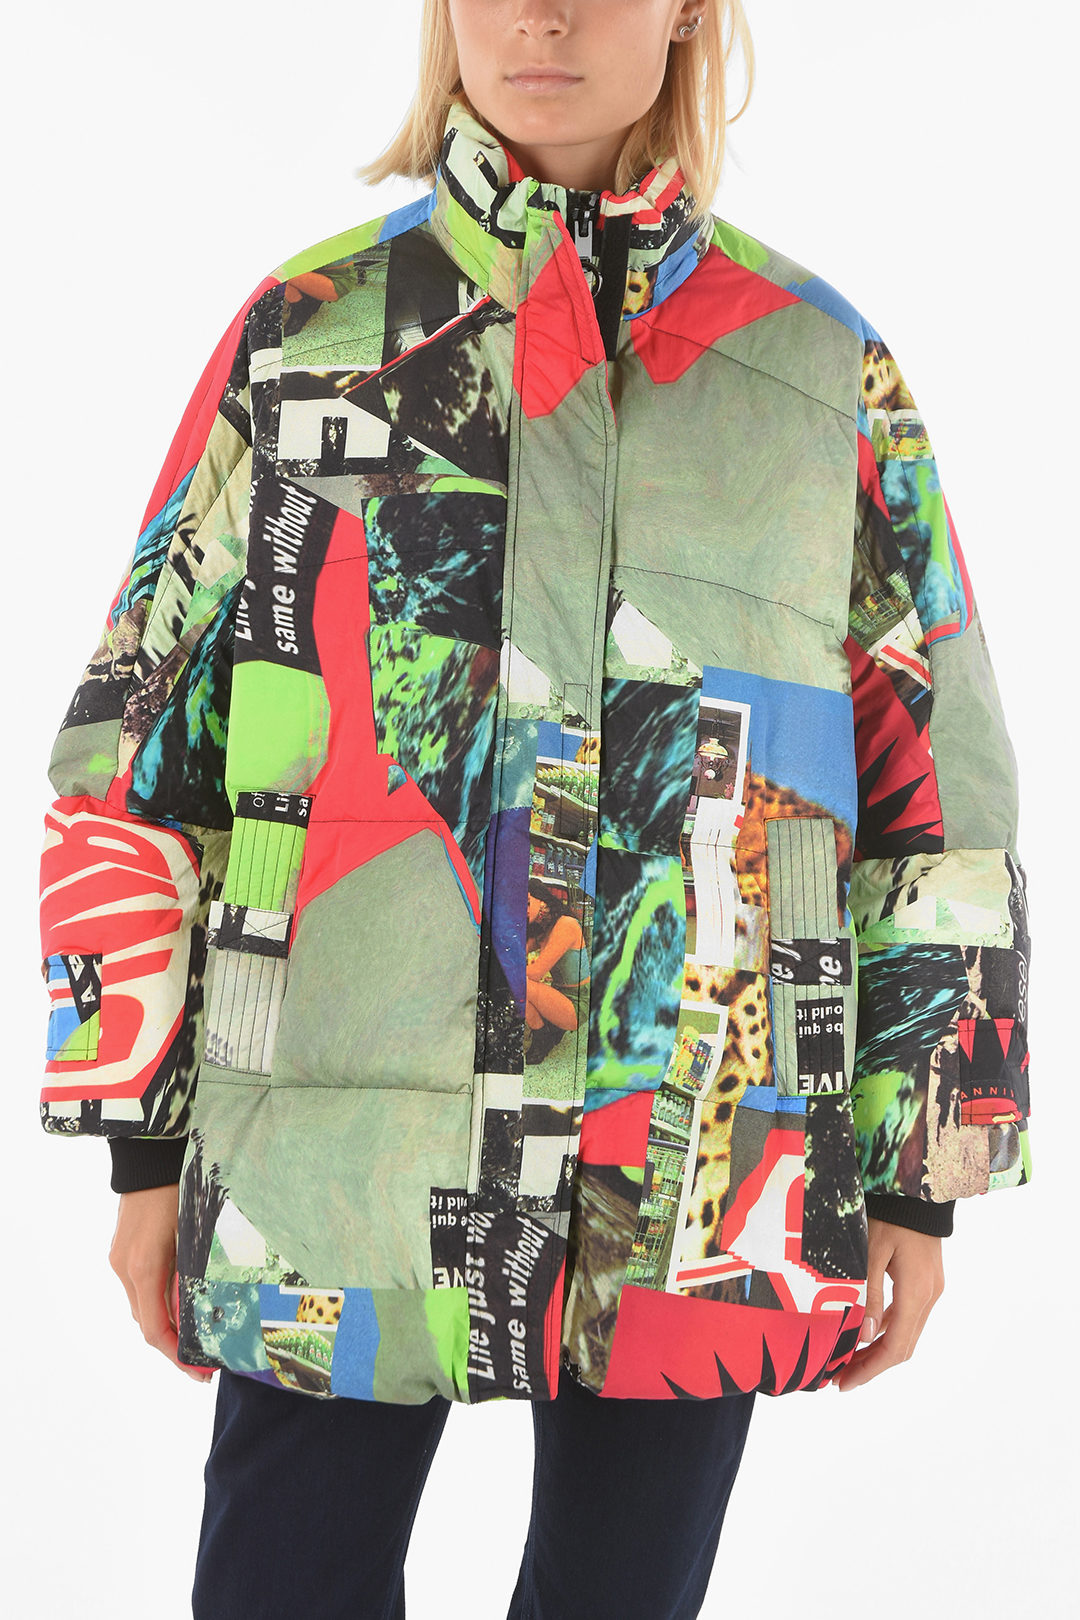 veld Implicaties lancering Diesel All Over Printed Puffer W-EMMICK Maxi Jacket women - Glamood Outlet